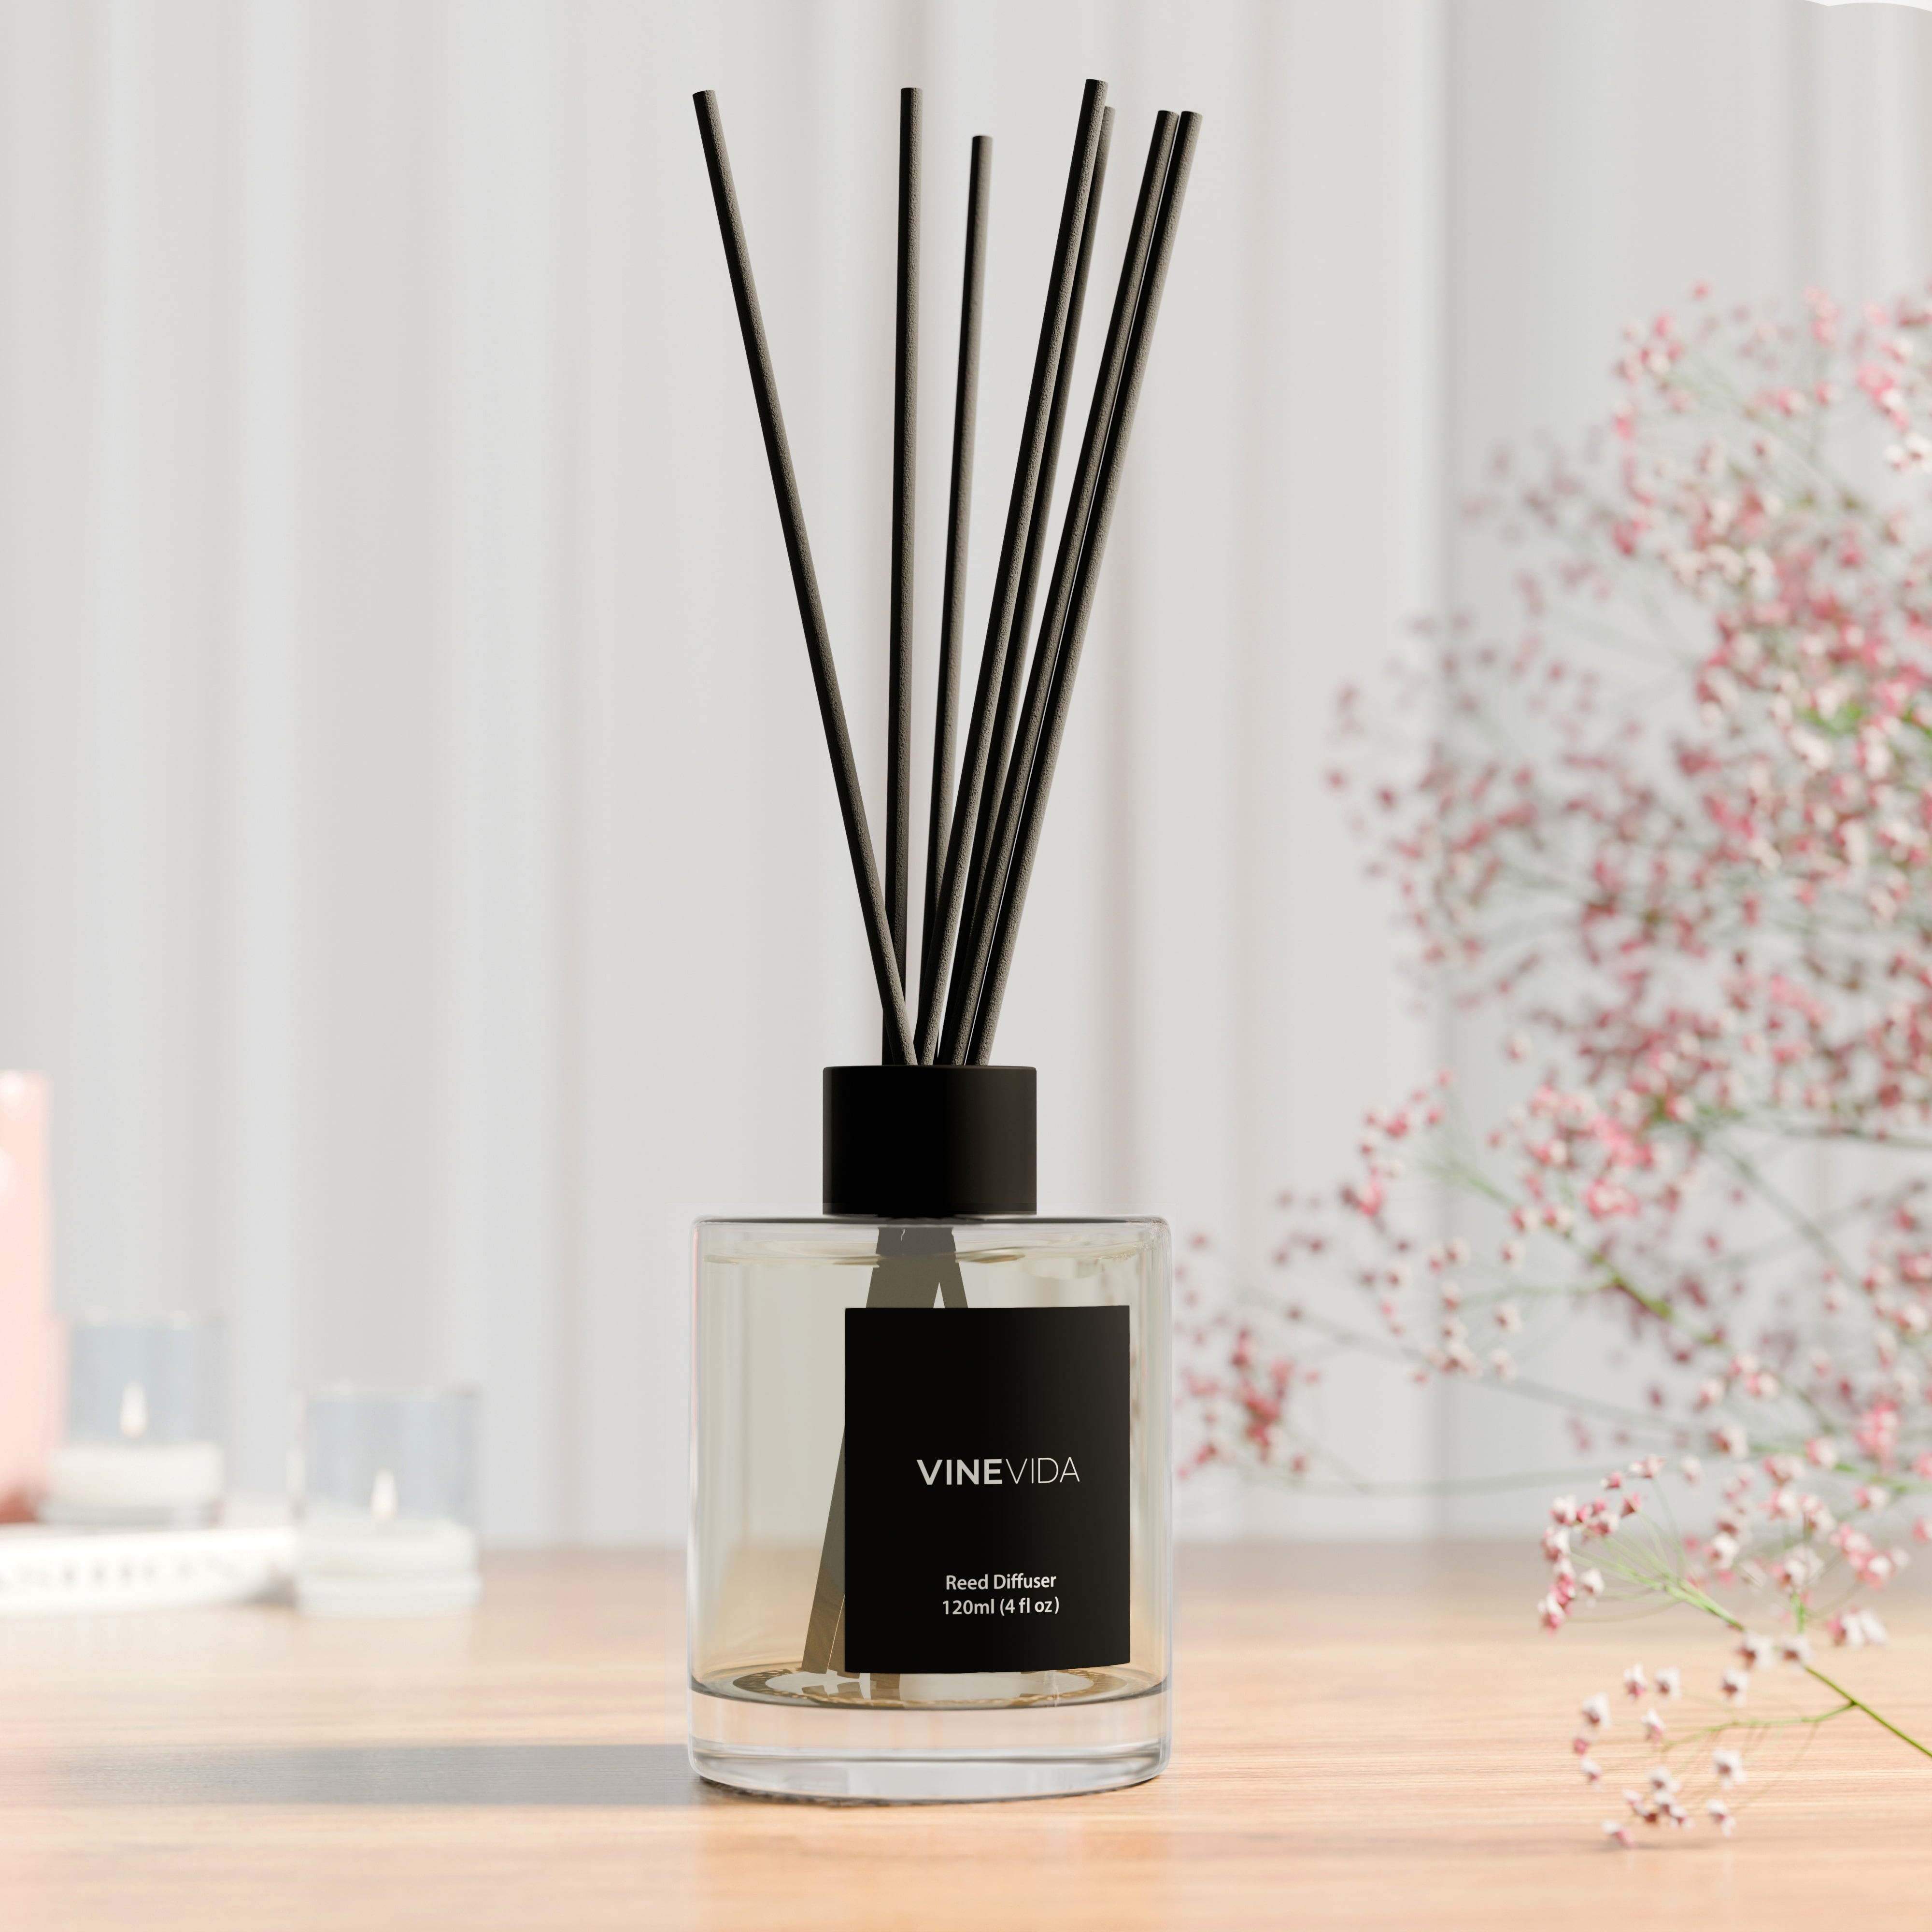 NO. 3100 Reed Diffuser - Inspired by: Tobacco Vanille by Tom Ford